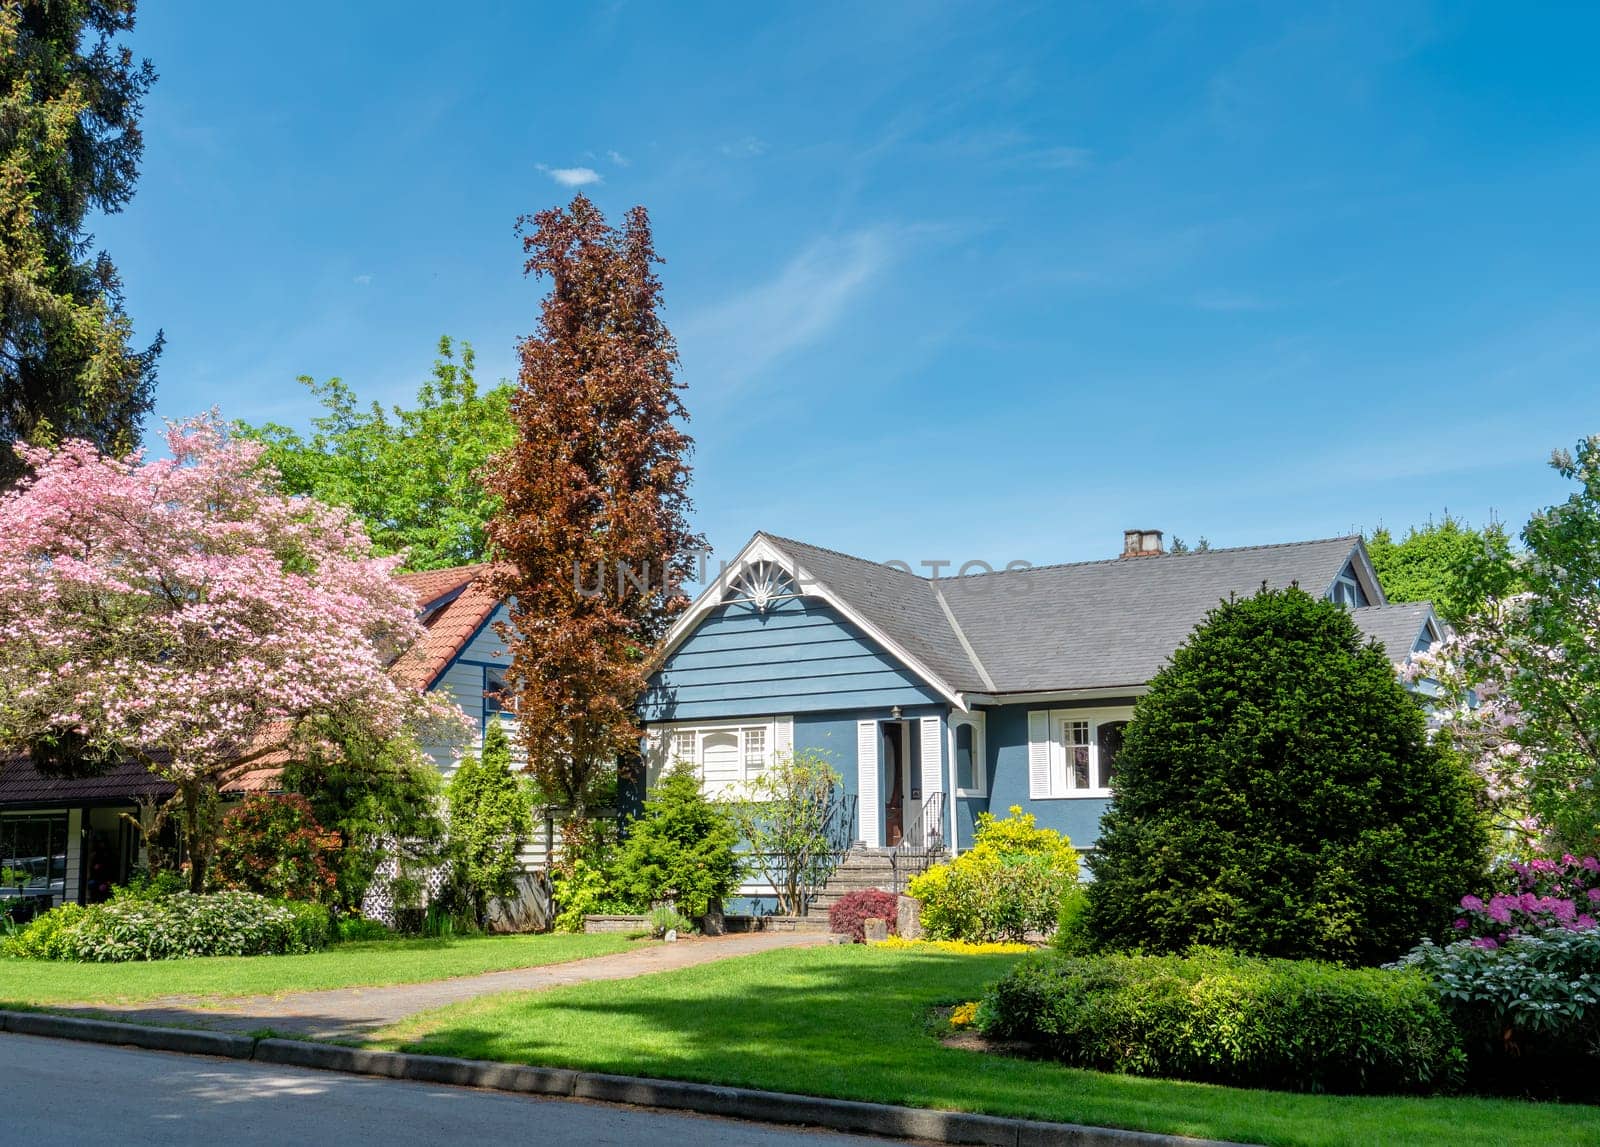 Residential neighborhood on bright sunny day in Vancouver, Canada